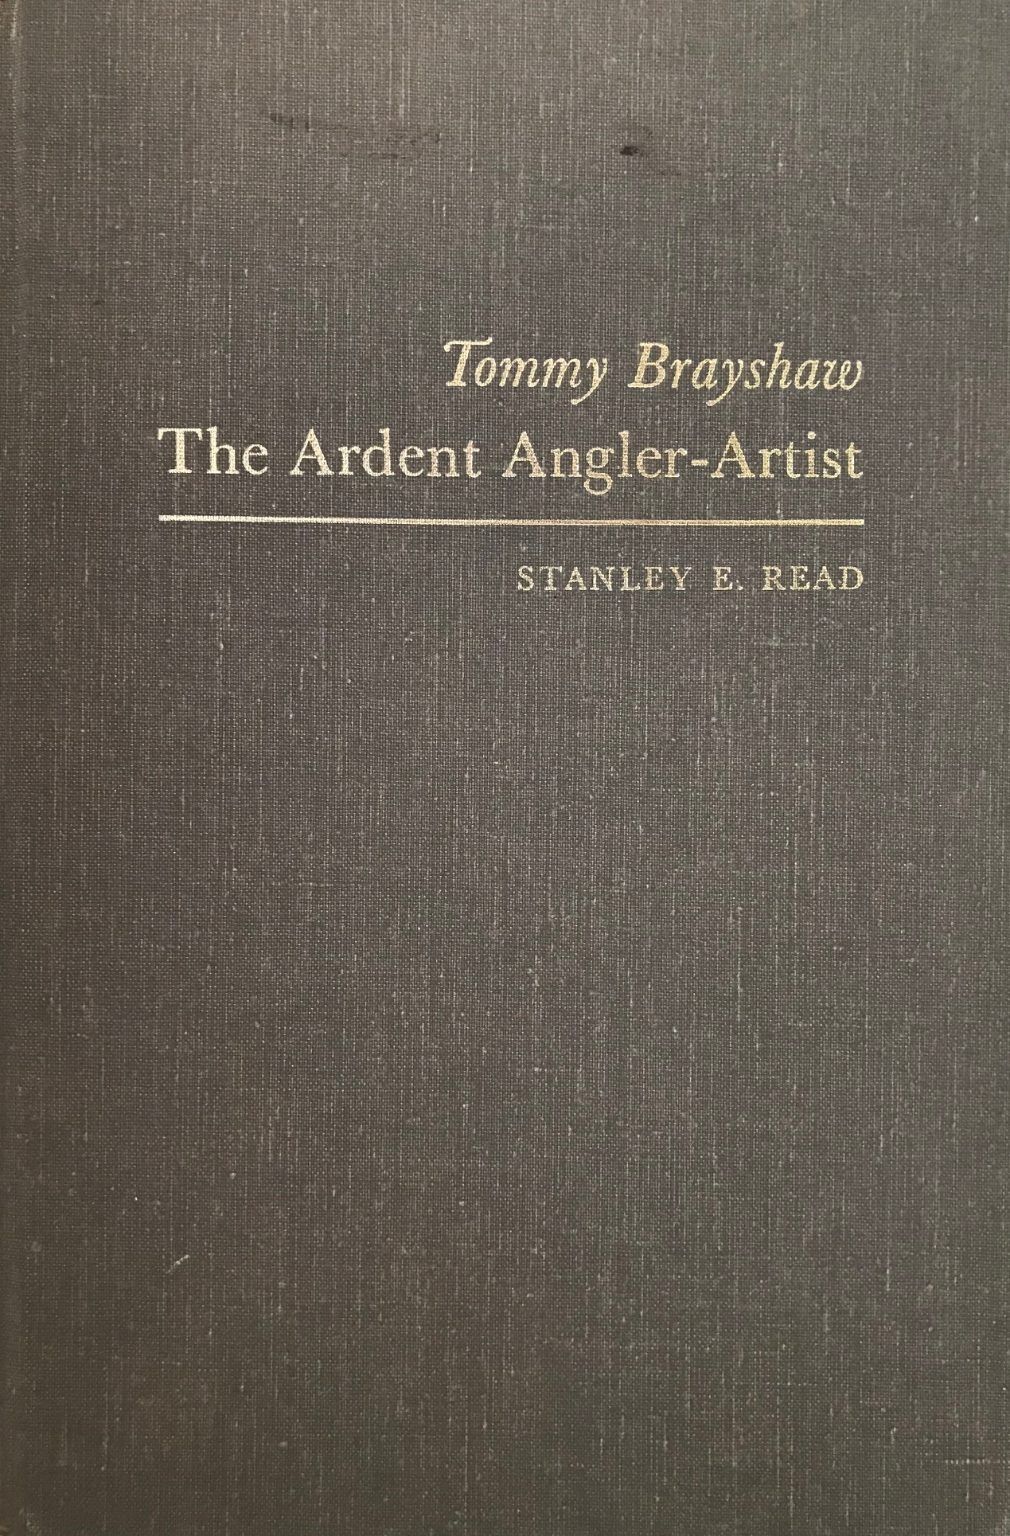 TOMMY BRAYSHAW: The Ardent Angler-Artist